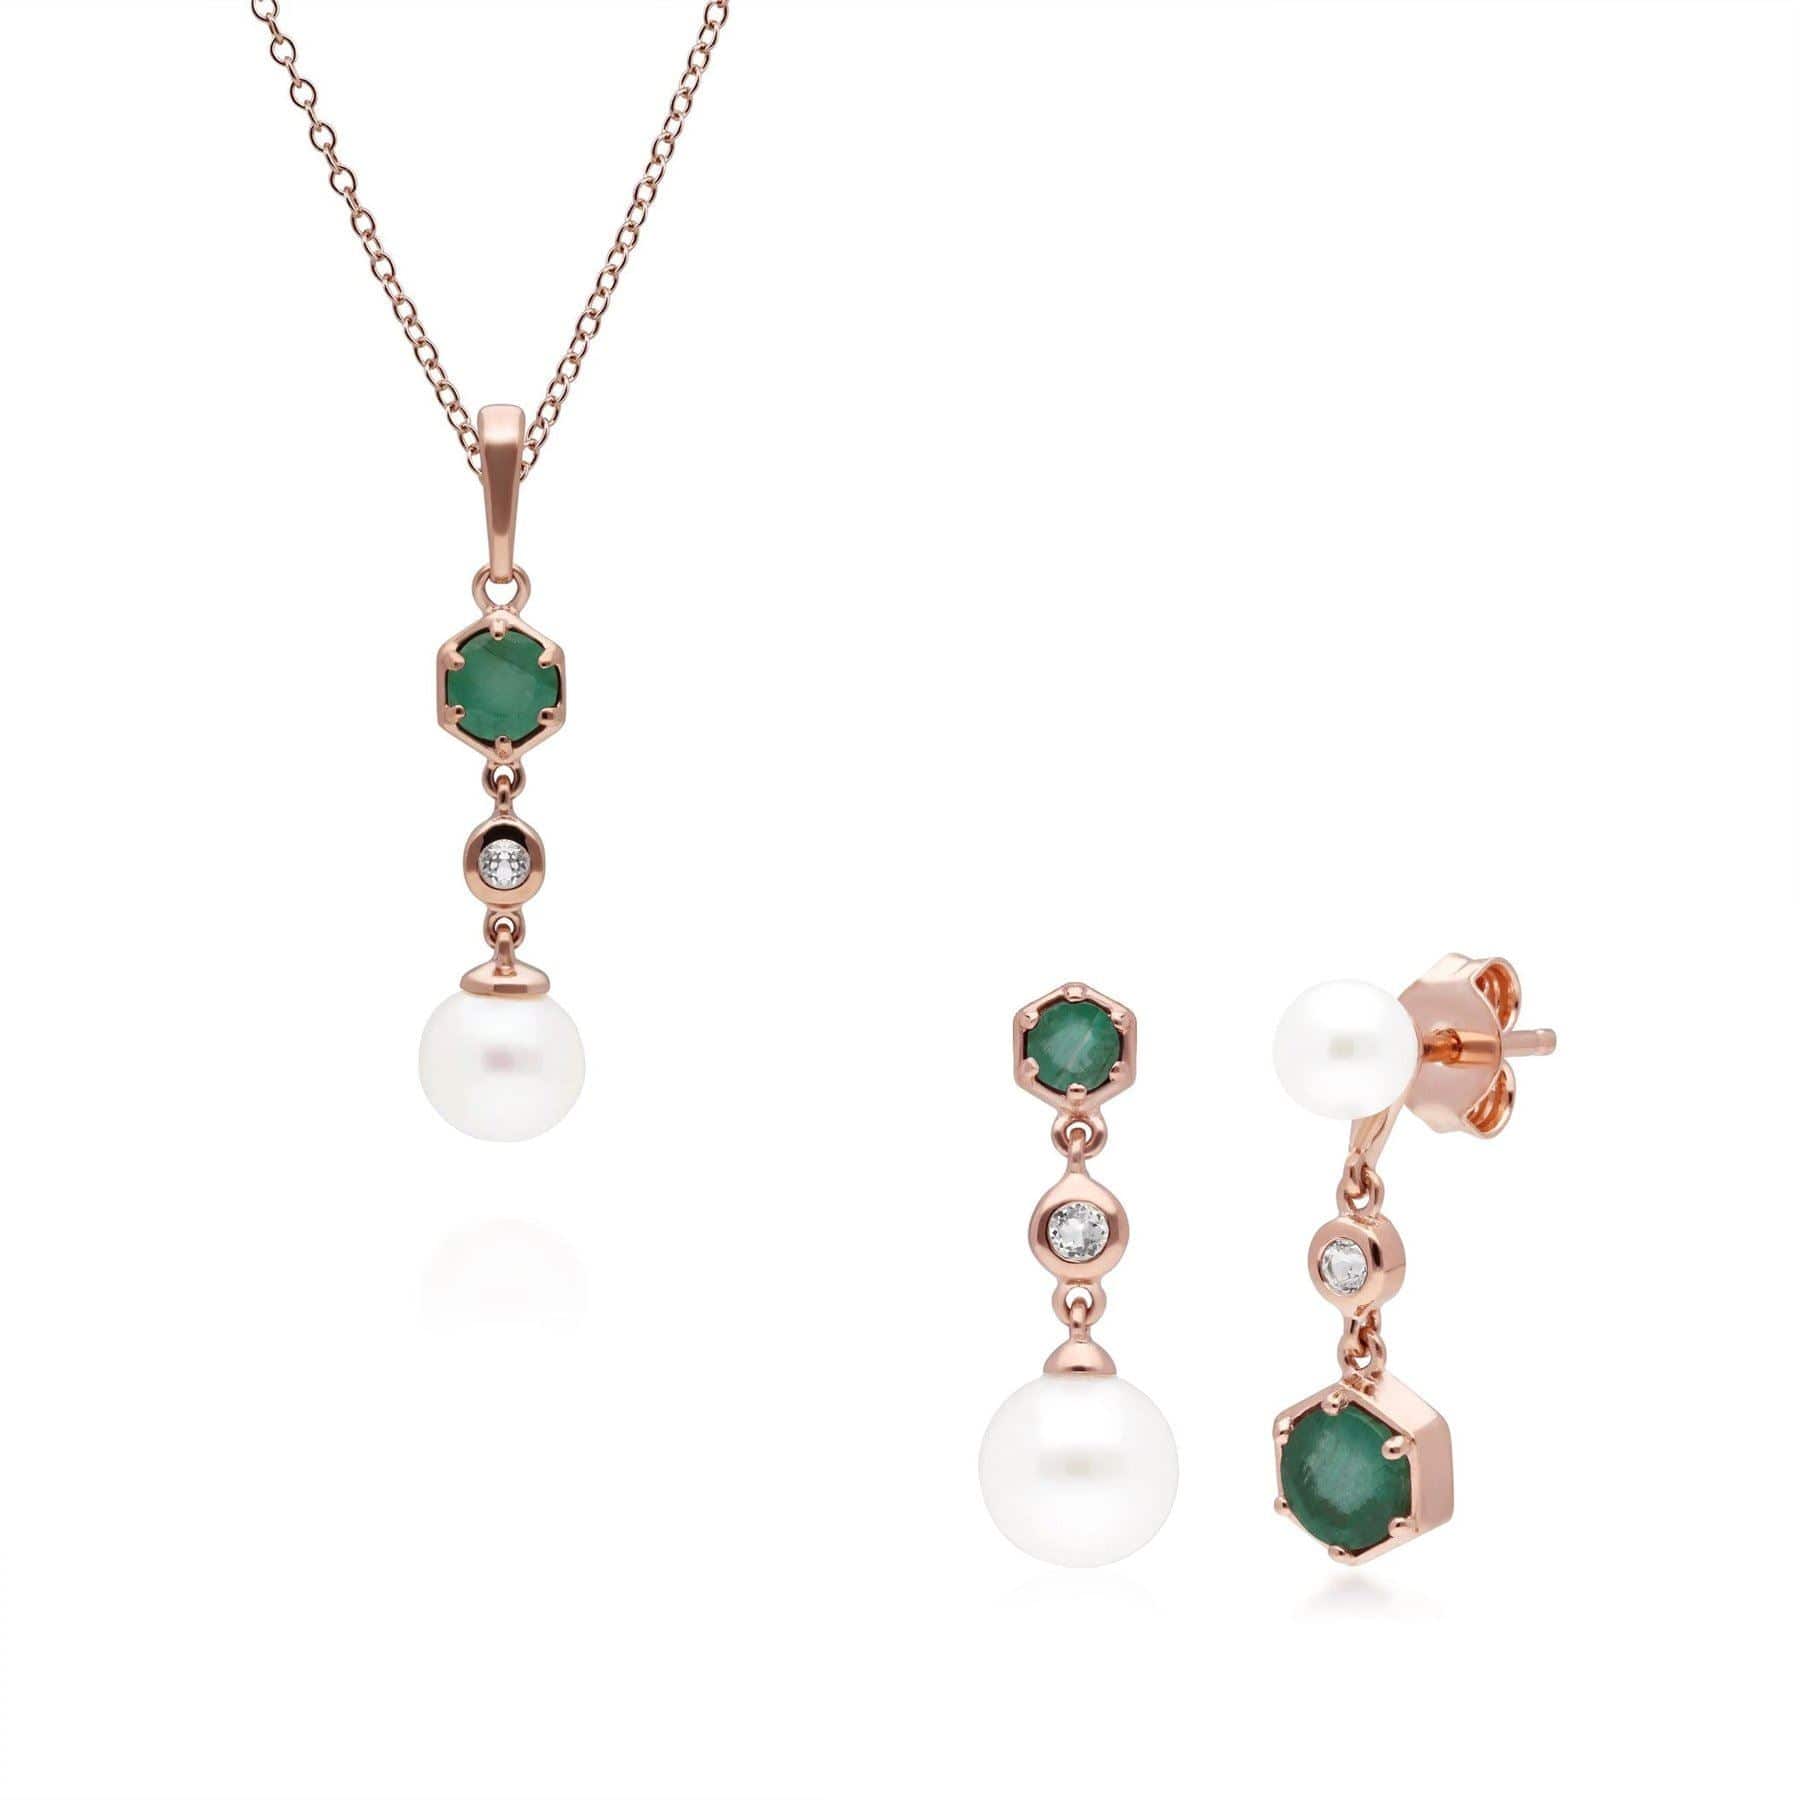 270P030303925-270E030303925 Modern Pearl, Emerald & Topaz Pendant & Earring Set in Rose Gold Plated Silver 1